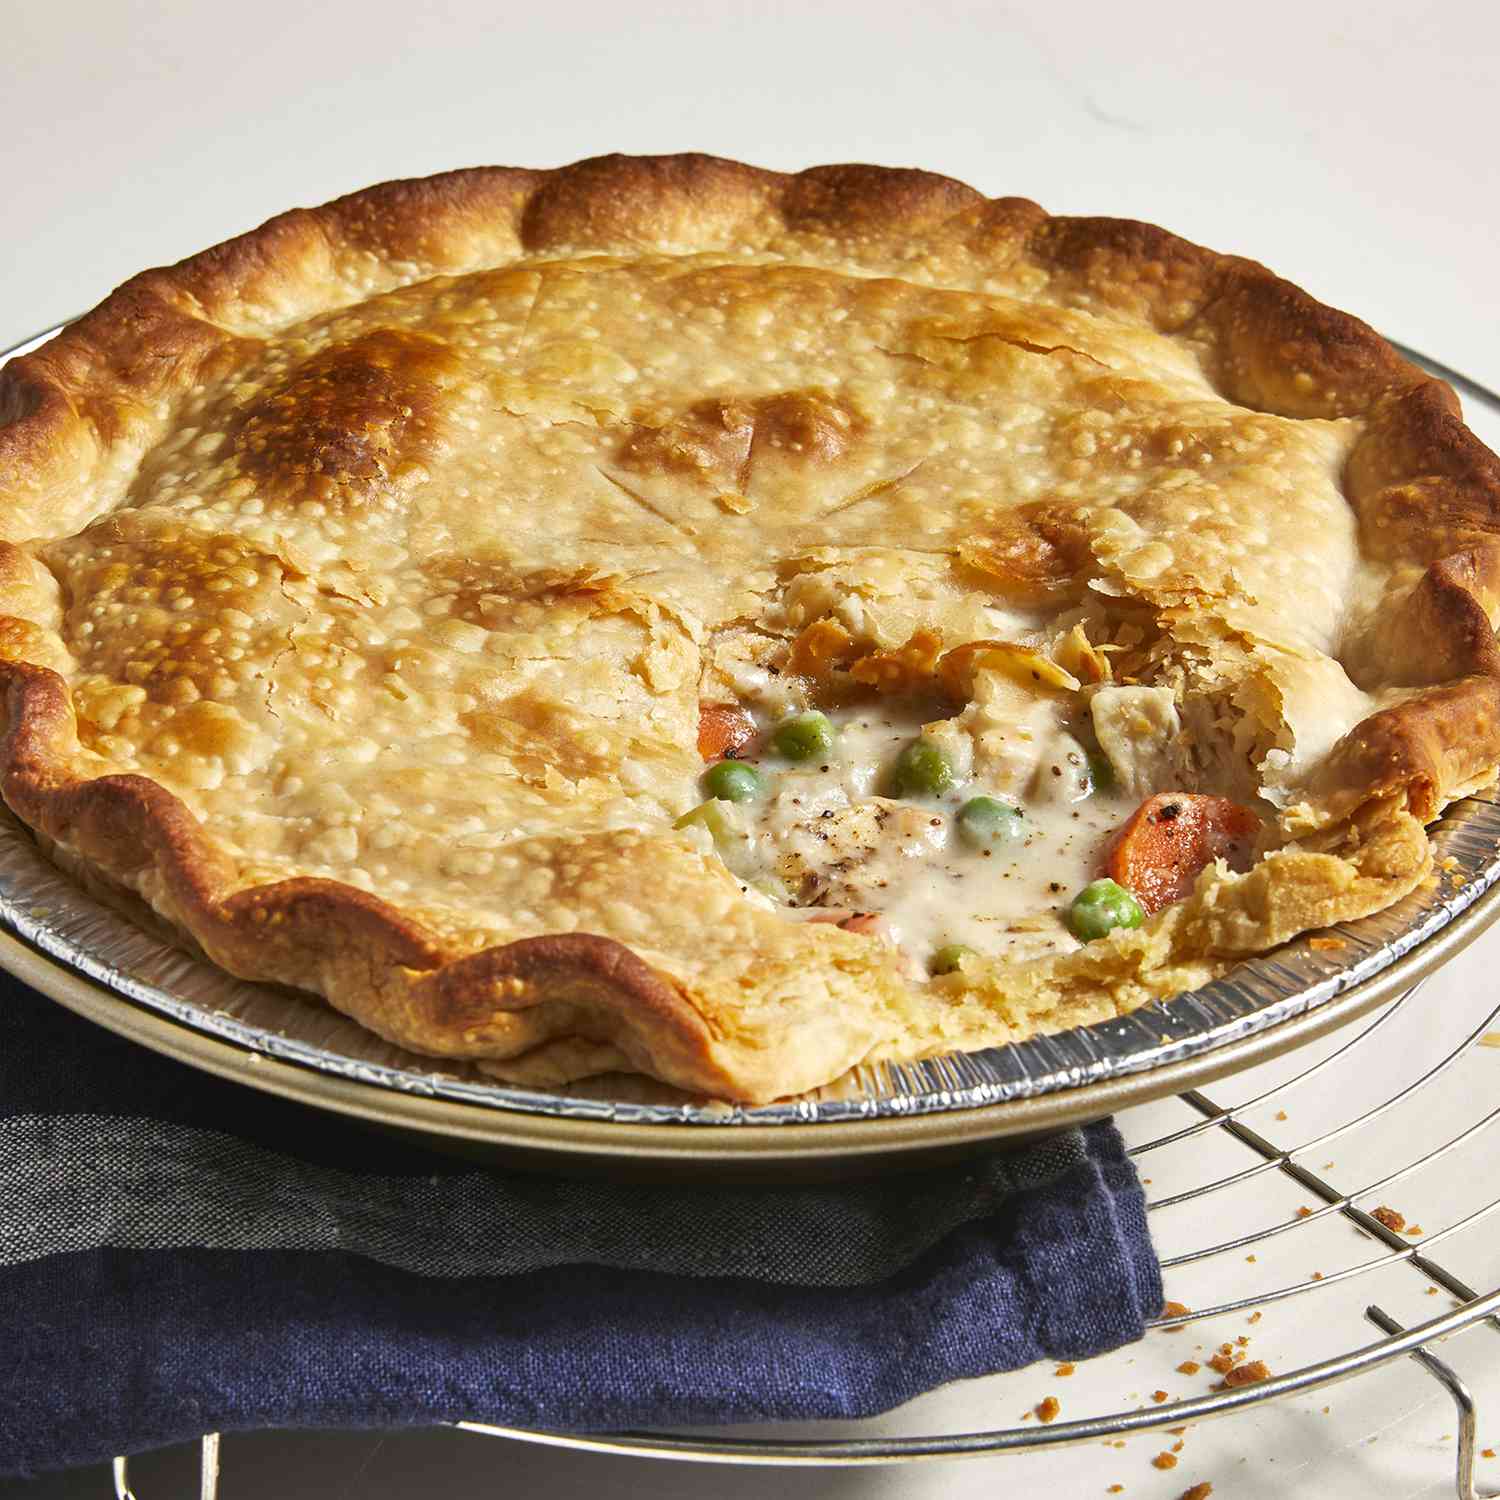 a low, close up view of a golden-brown chicken pot pie cooling on a rack, with a piece missing revealing the creamy hardy pie filling.